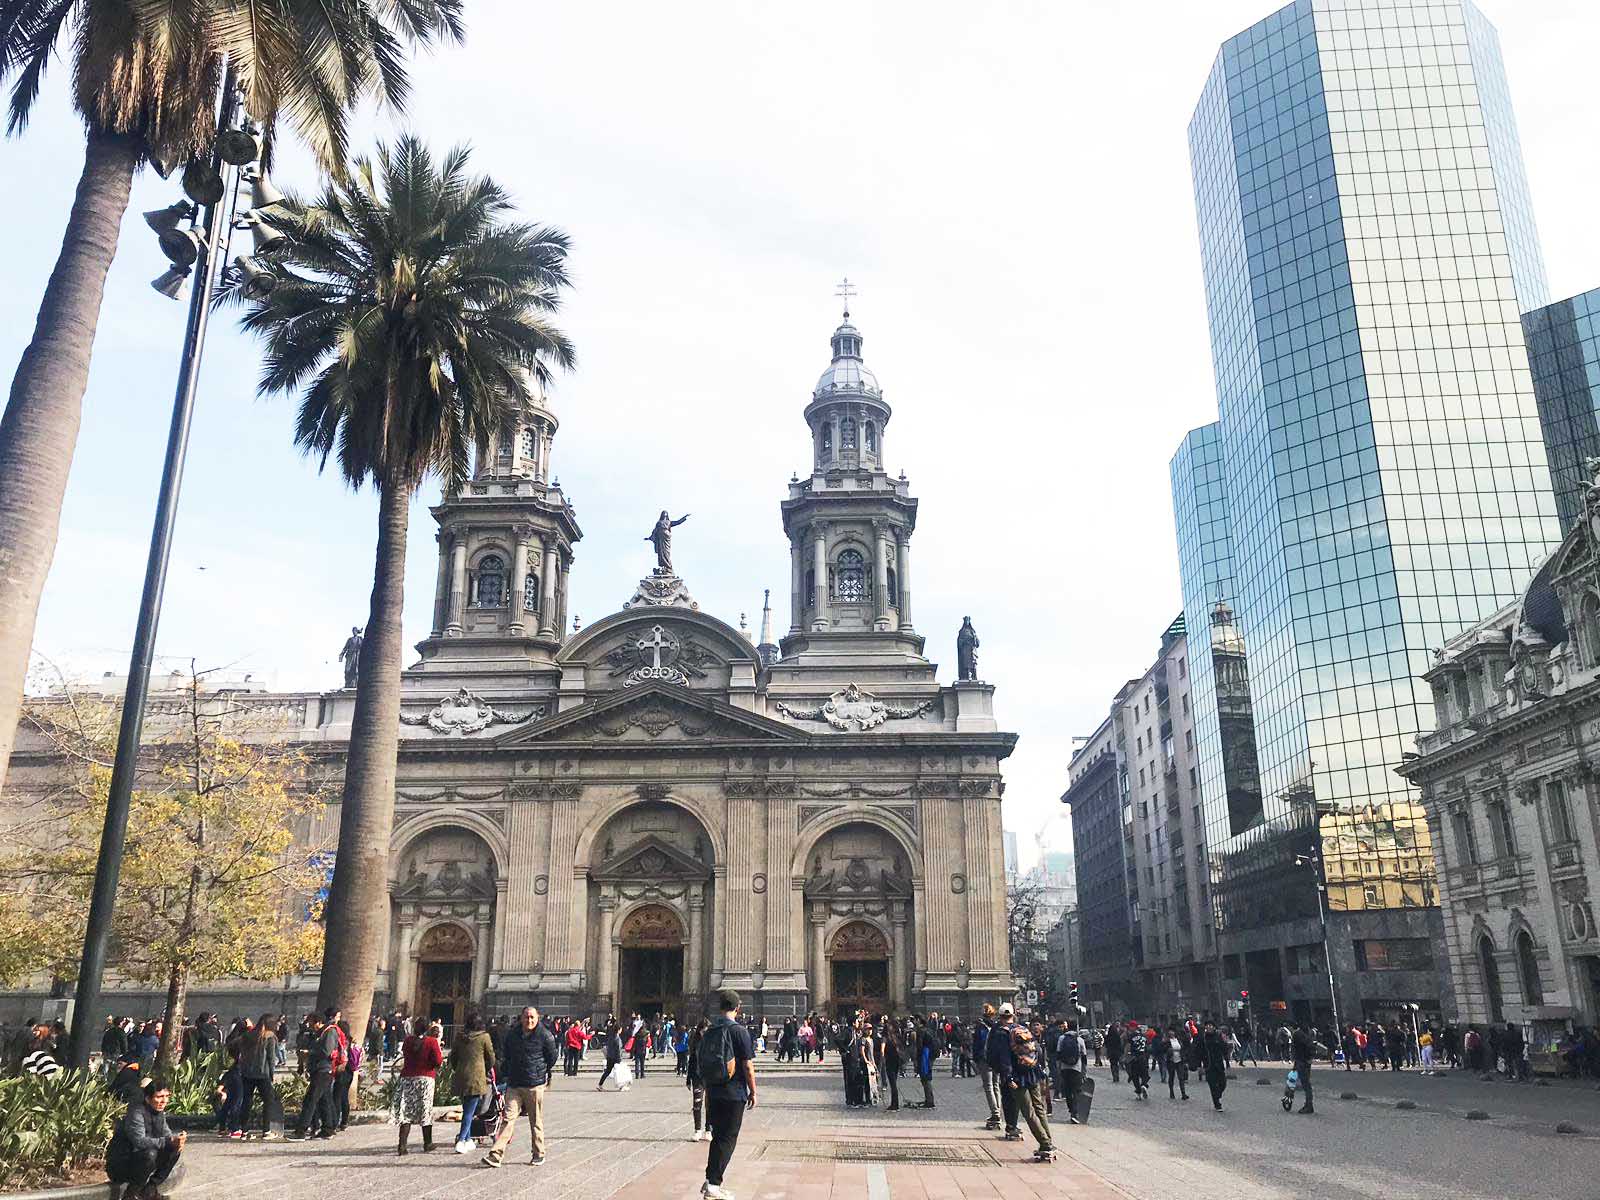 A mix of old and new buildings in downtown Santiago, Chile.